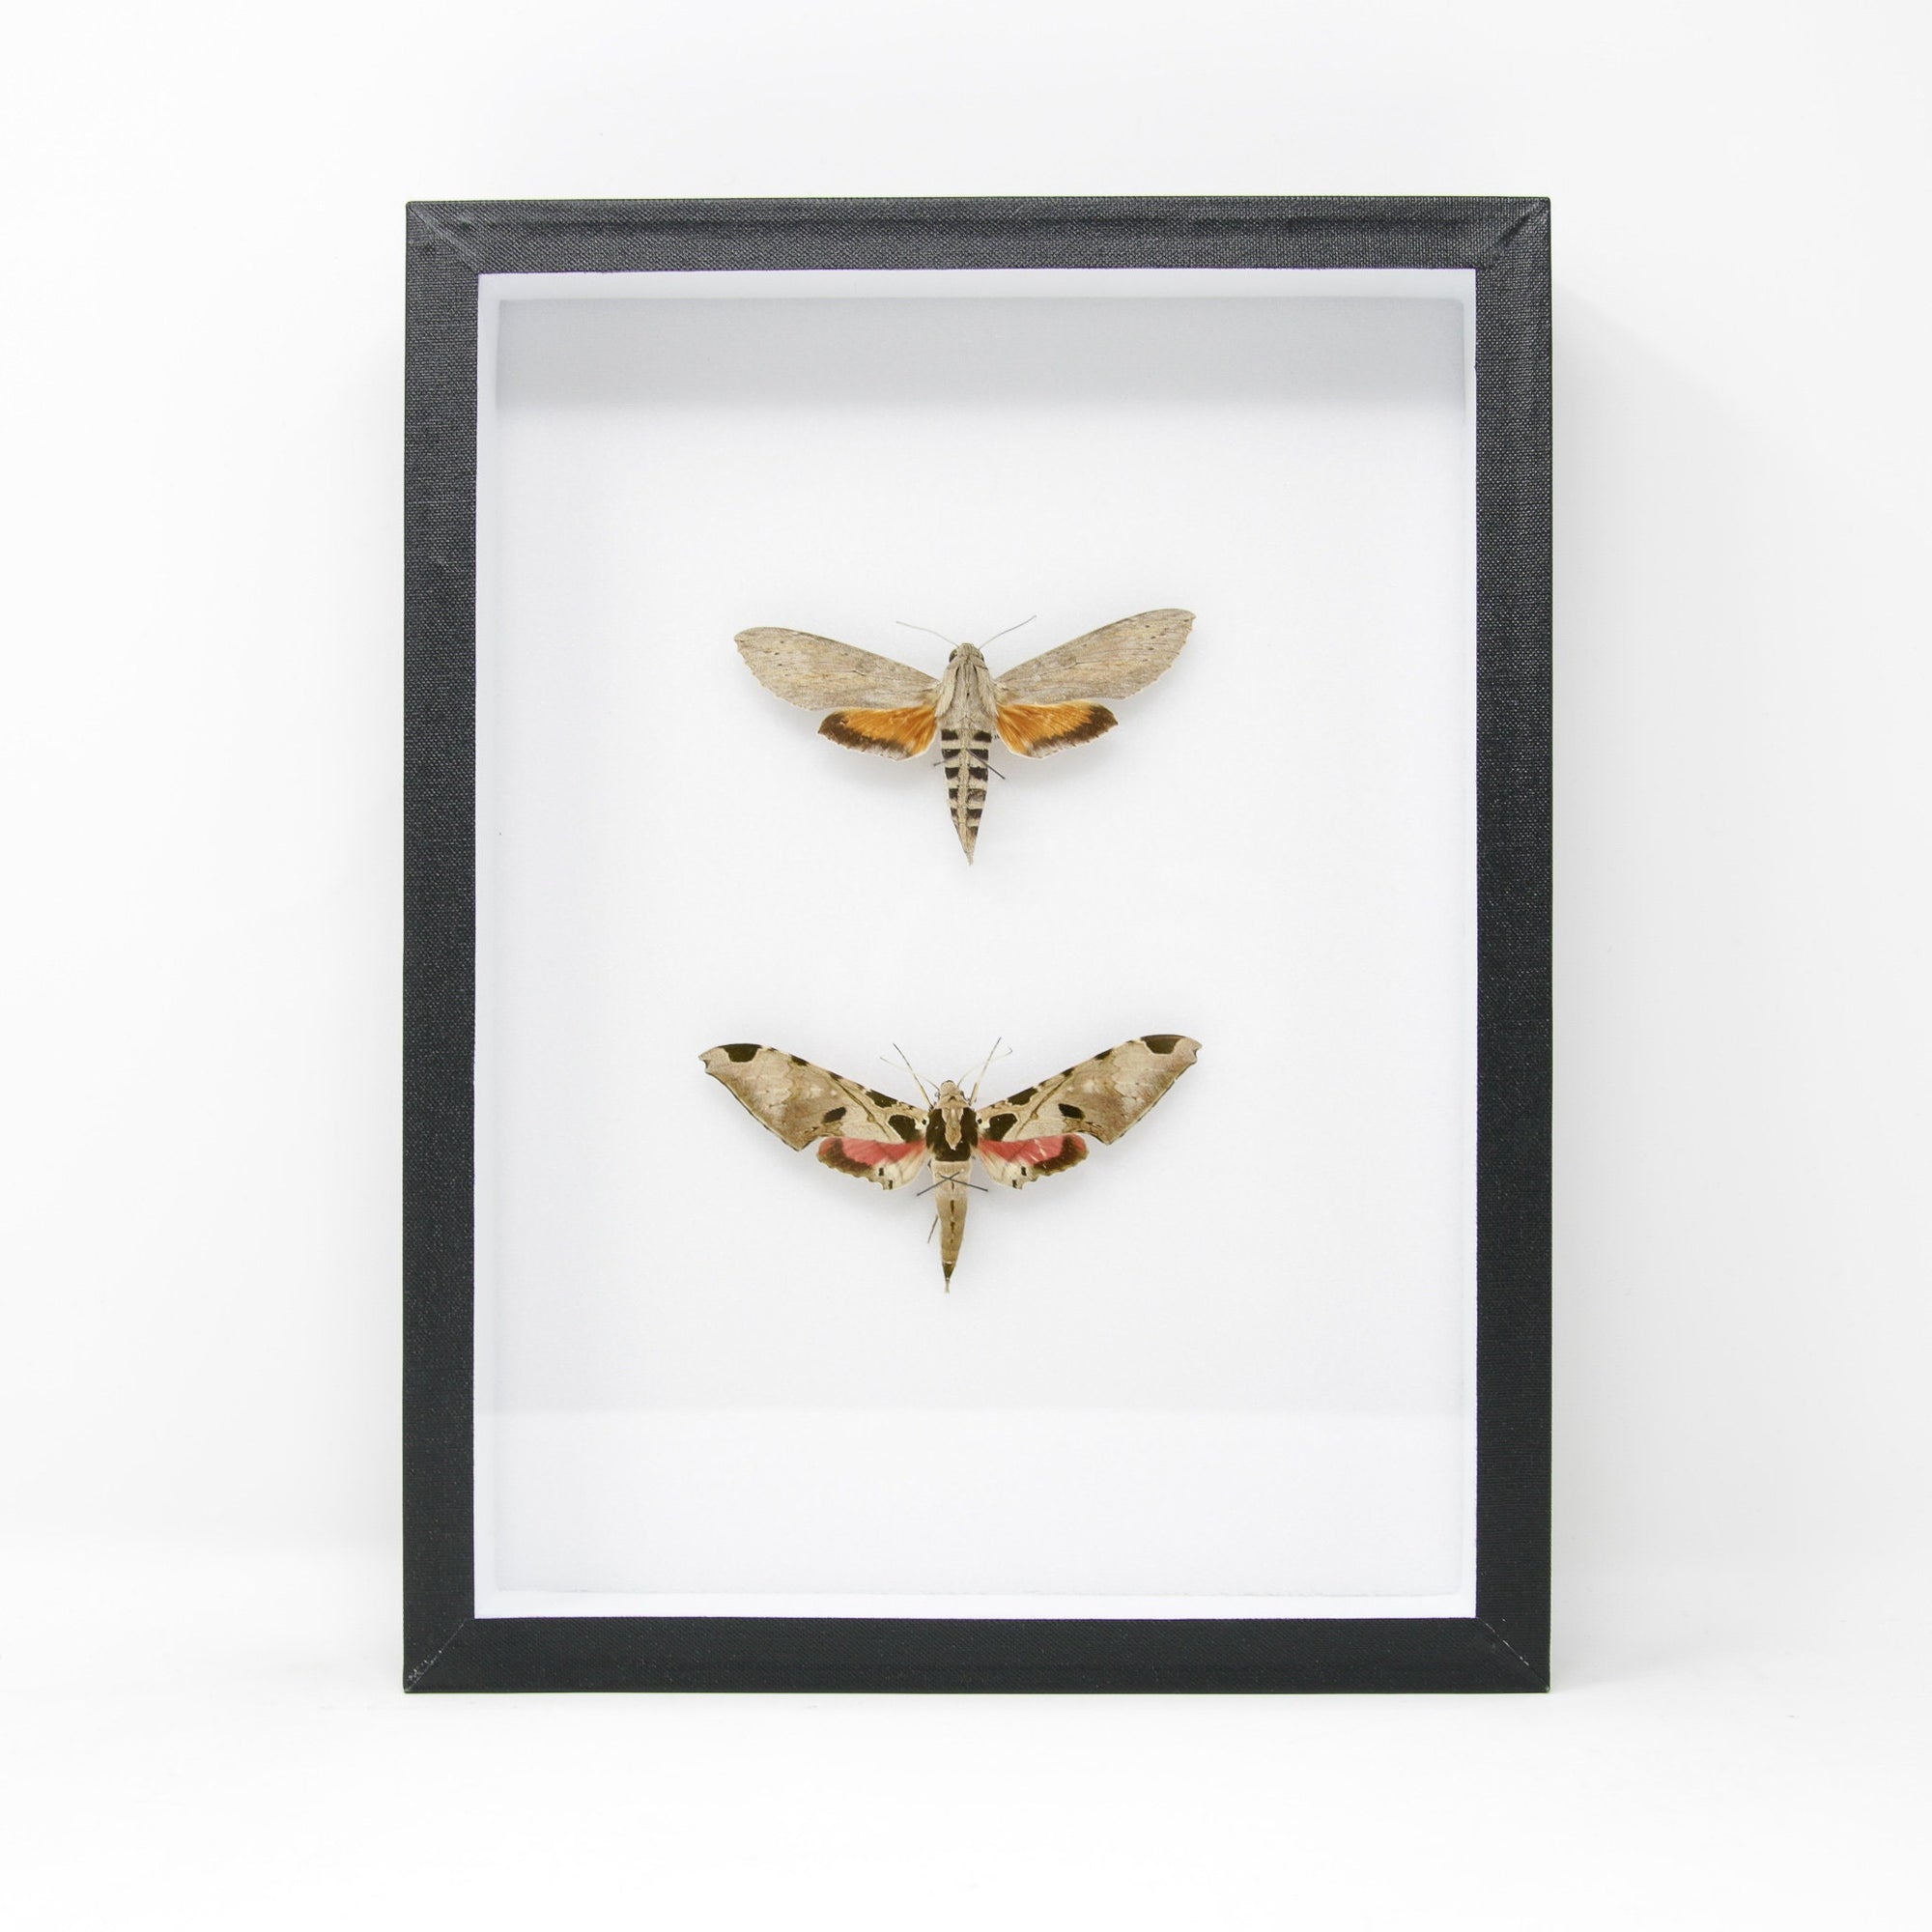 Hawkmoth Taxidermy Specimens | Pinned Lepidoptera with Scientific Collection Data, Entomology Box Frame | 12x9x2 inch (BFS06)